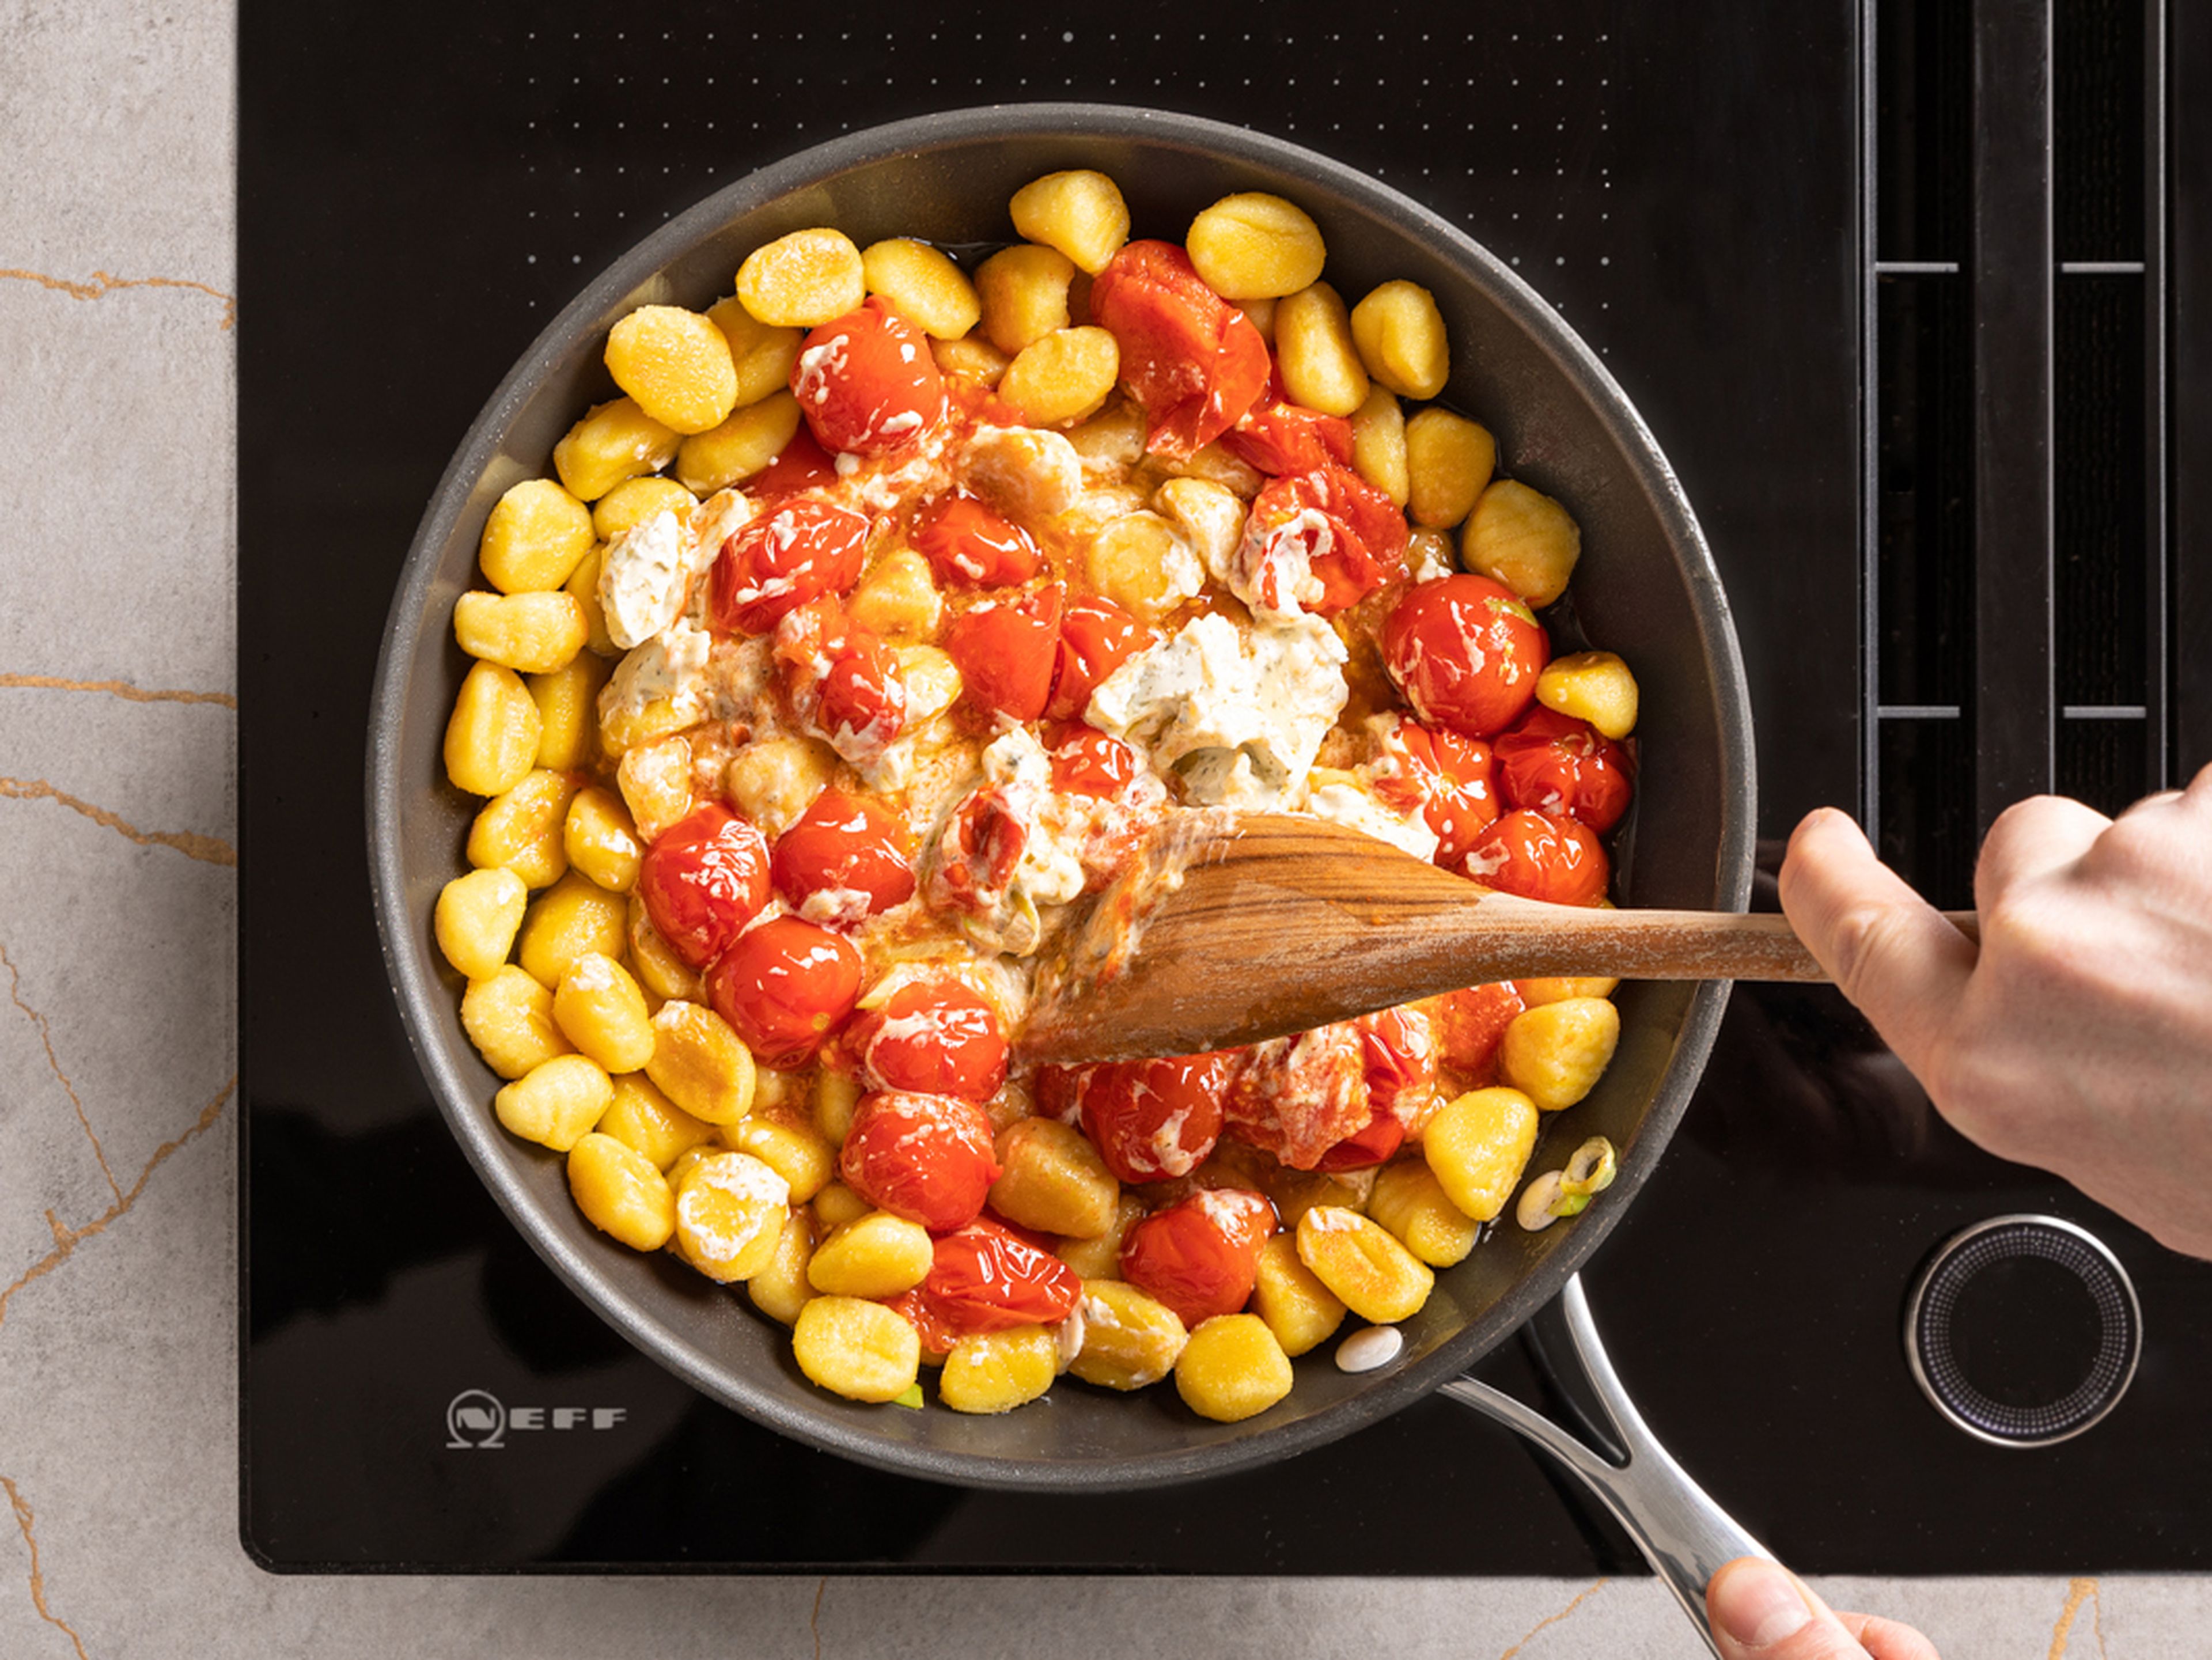 Heat some oil in a large frying pan and fry the gnocchi in it for approx. 6–8 min. until golden brown. Add burst cherry tomatoes and some herb cream cheese to the gnocchi in the pan, toss and season with salt and pepper.